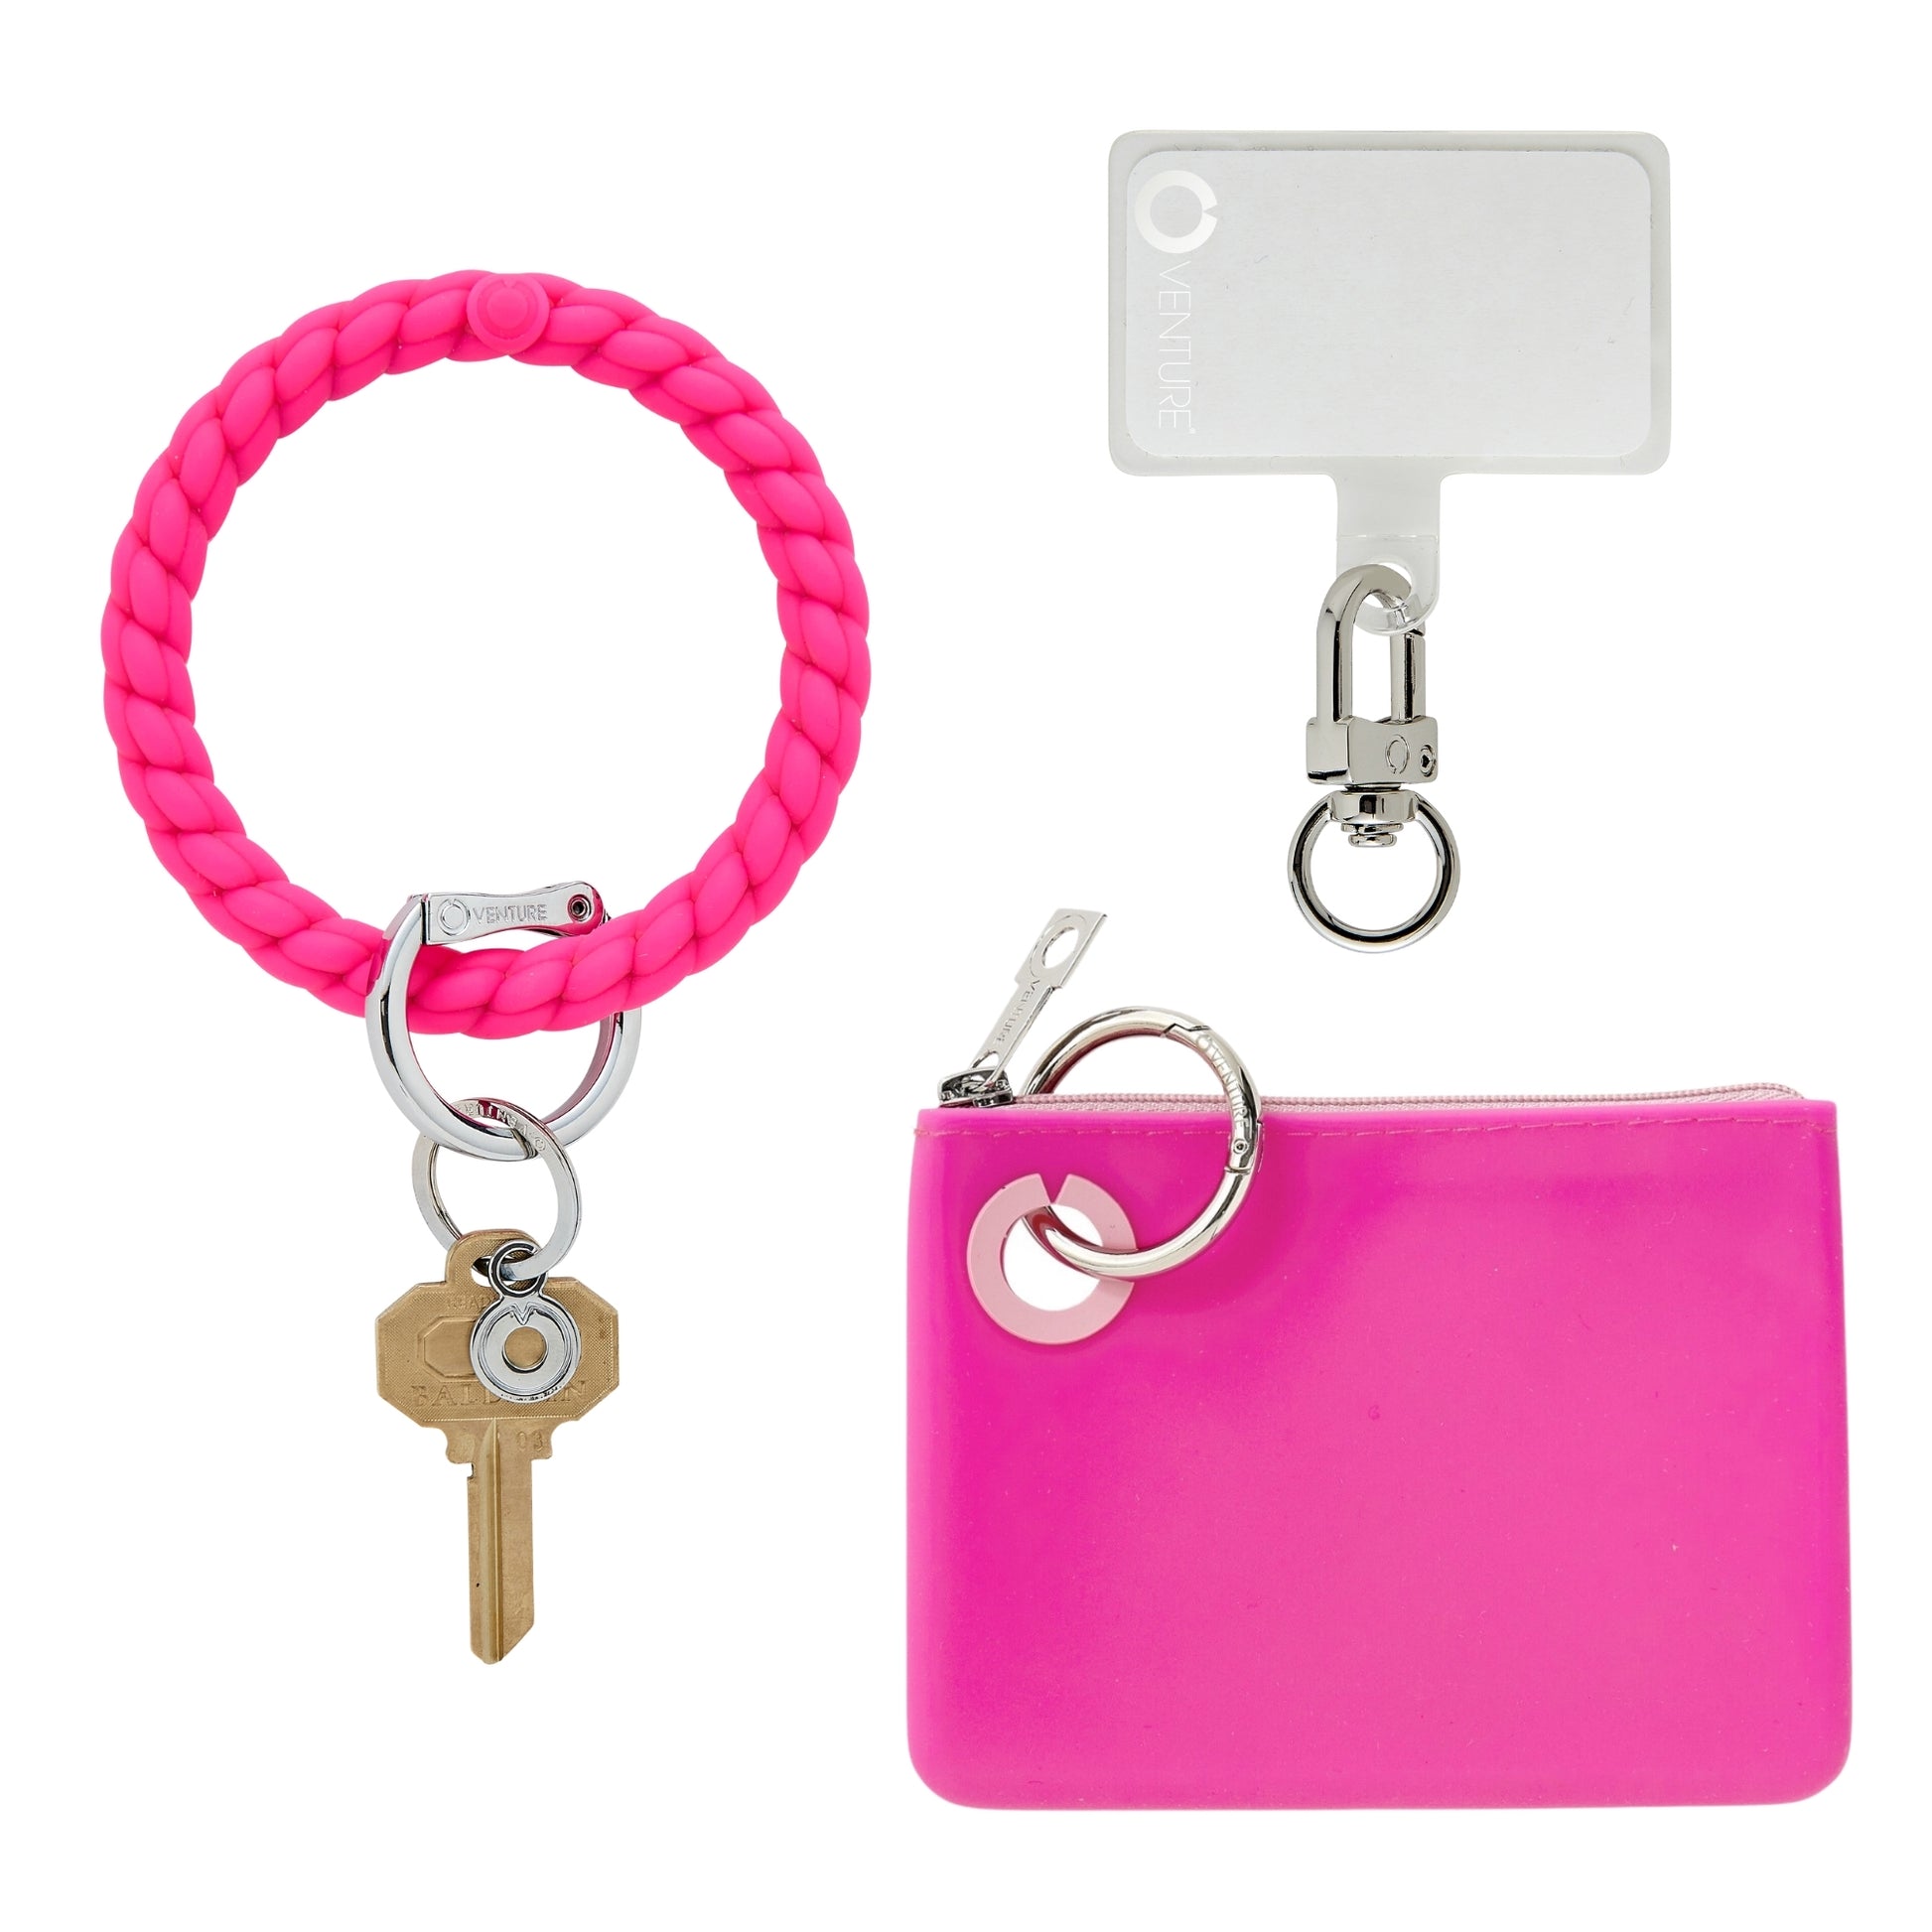 Big O Silicone Patterned Key Ring - The Old School